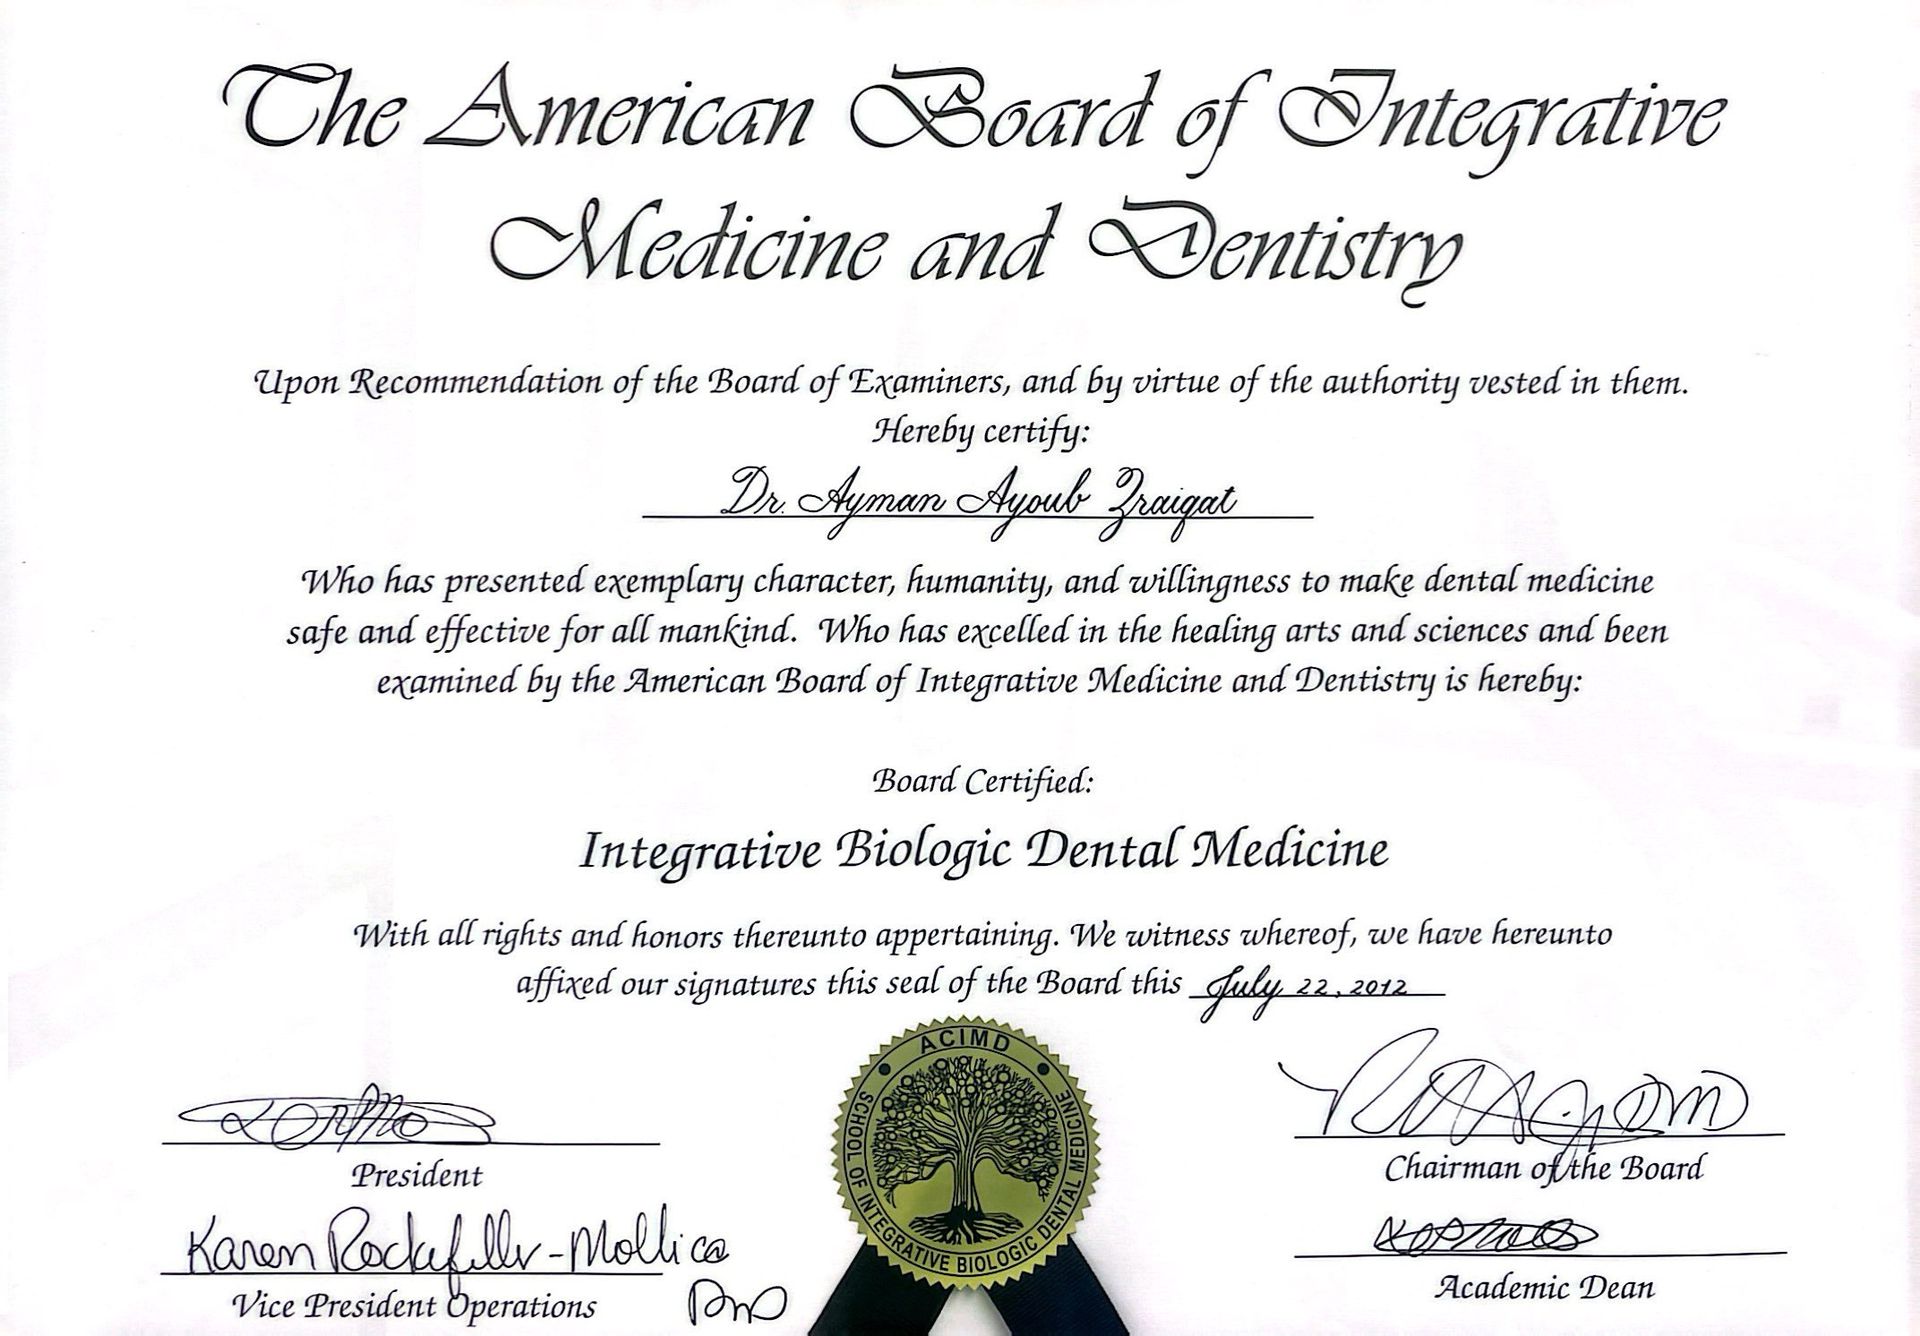 Certificate from the American Board of Integrative Medicine and Dentistry, awarded to Dr. Ayman Ayoub Zraigat for excellence in dental medicine.